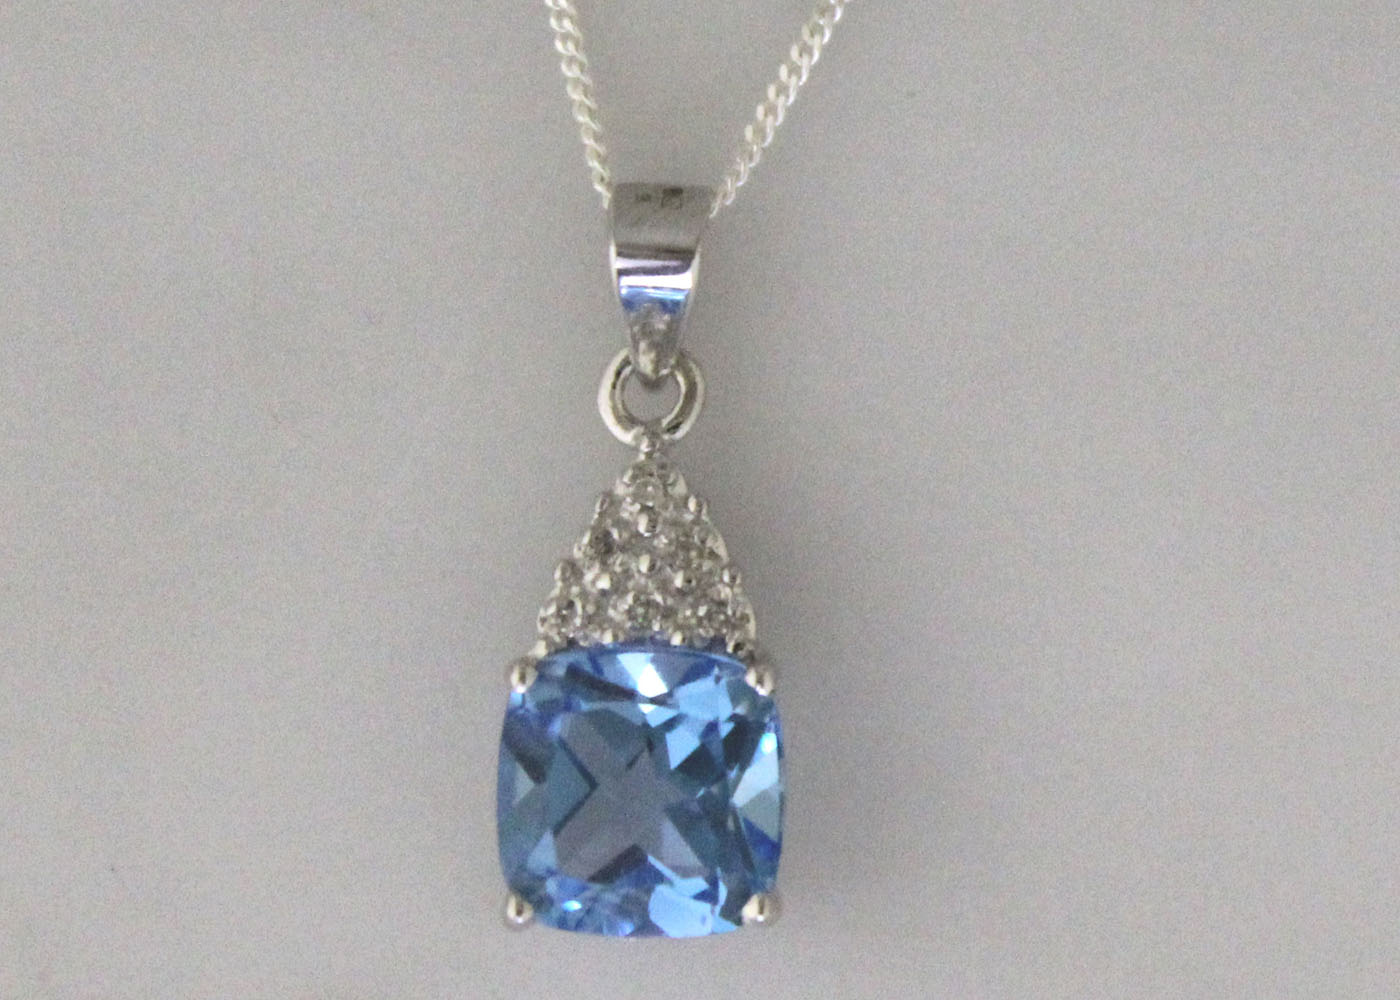 9ct White Gold Diamond And Blue Topaz Pendant 0.02 Carats - Image 5 of 6